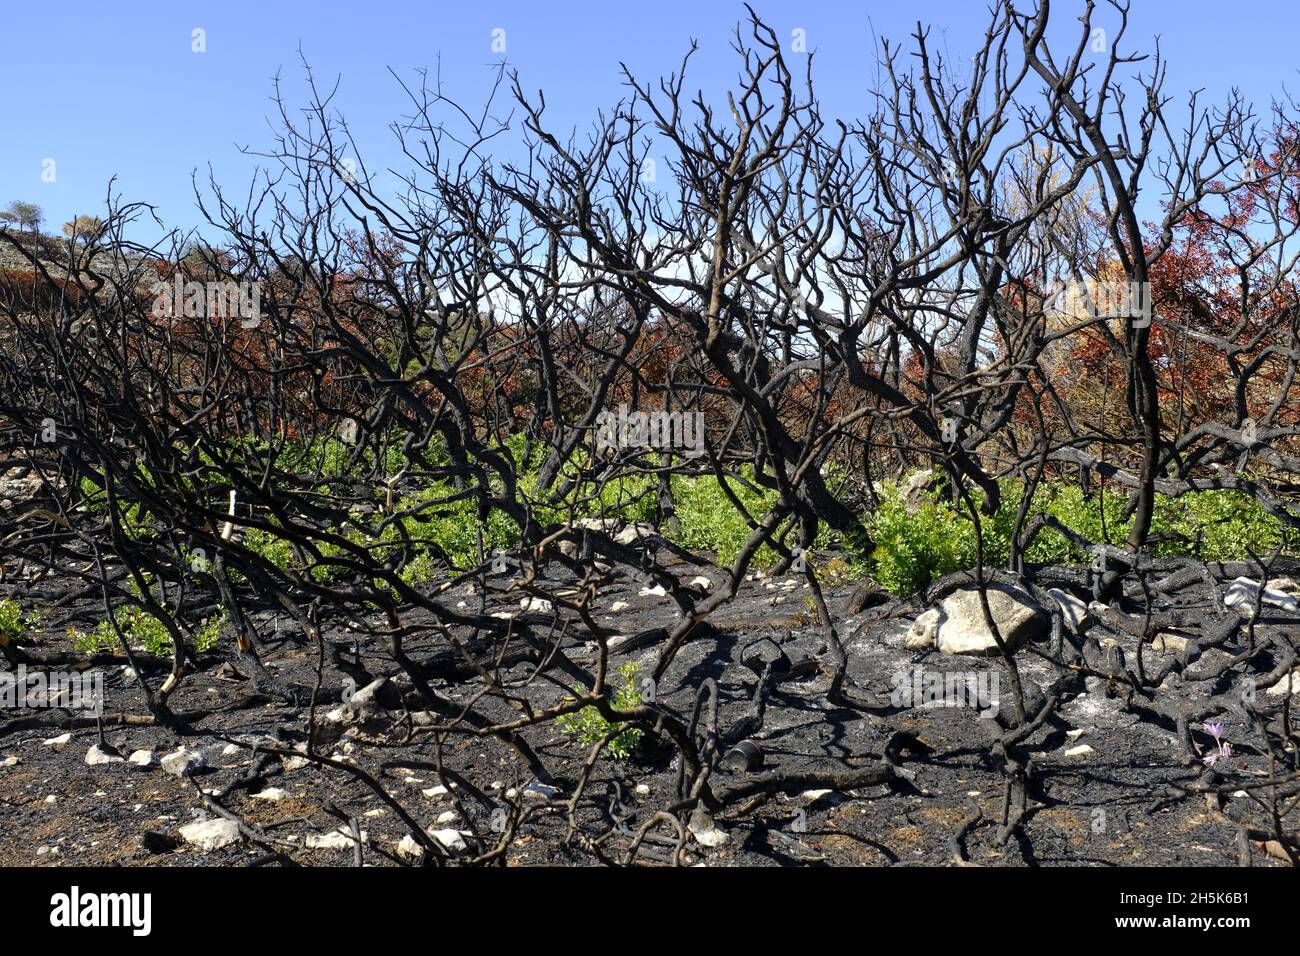 Regrowth of plants 3 months after a summer wildfire in the Algar region of the Sierras Subbeticas Natural Park, Cordoba Province, Andalucia, Spain Stock Photo